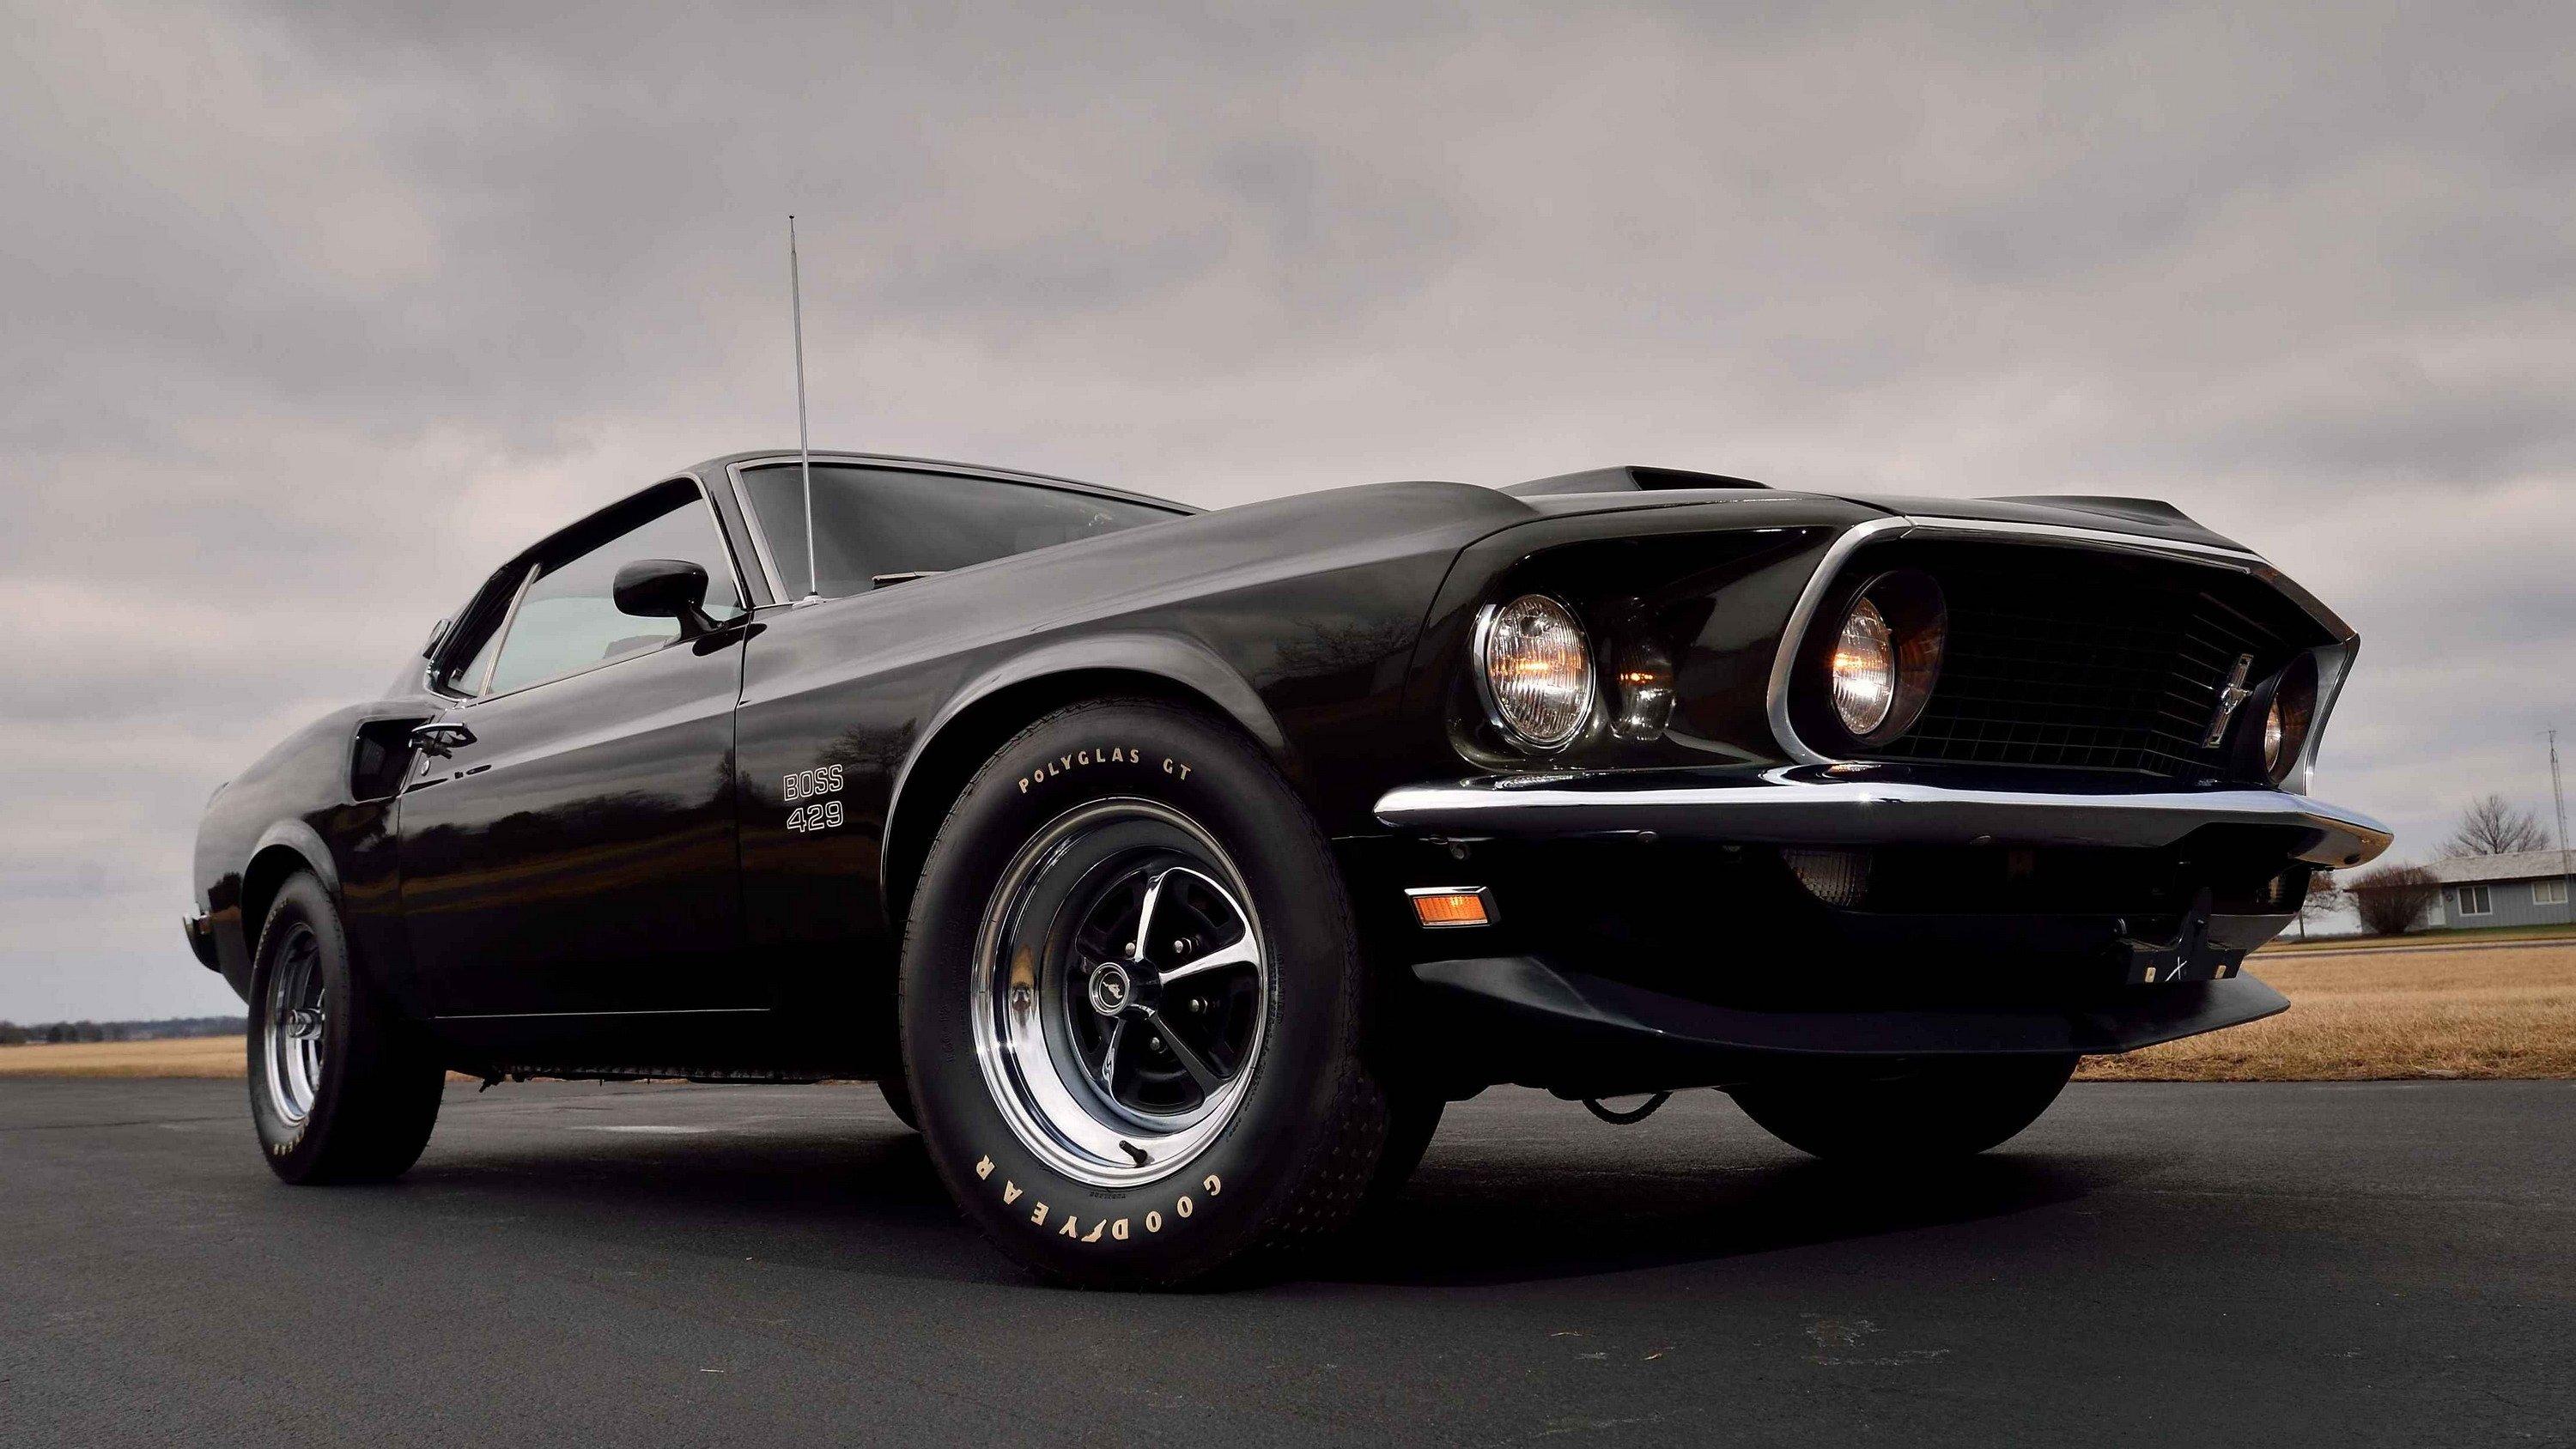 1969 Ford Mustang Boss 429 Pictures, Photos, Wallpapers.